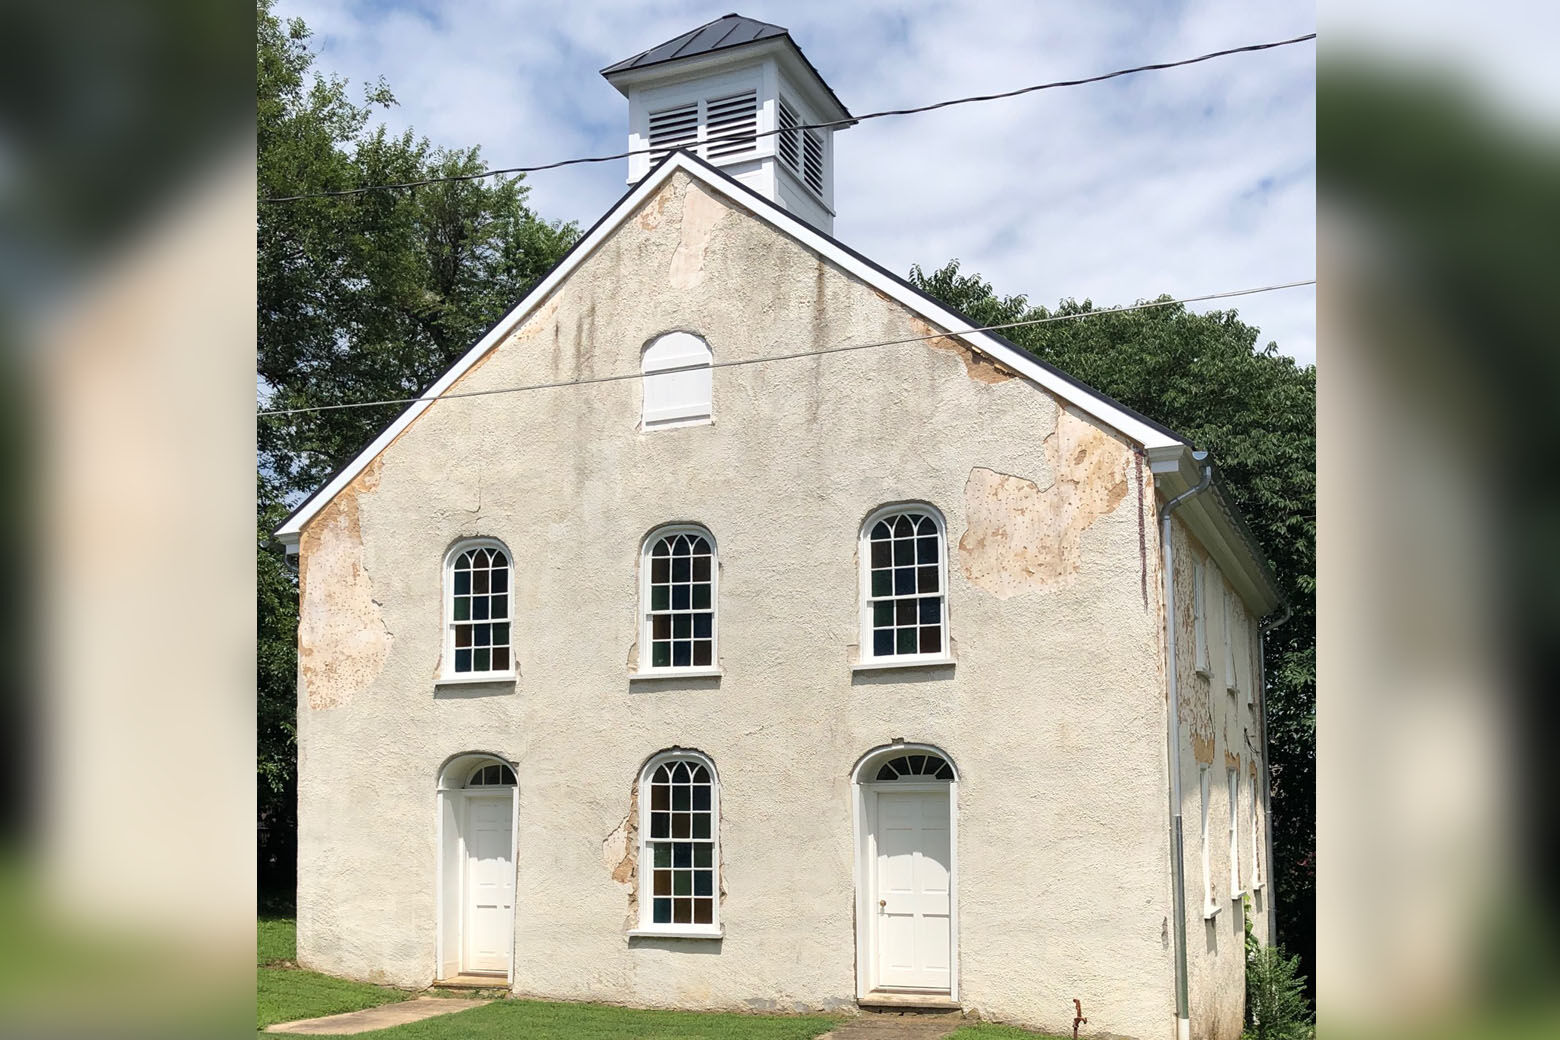 The Asbury Church, at 105 N. Jay Street, was built in 1829 and was originally home to the Methodist Congregation of Middleburg. In 1864, it was donated to the African American Methodist Church. (Courtesy Danny Davis)